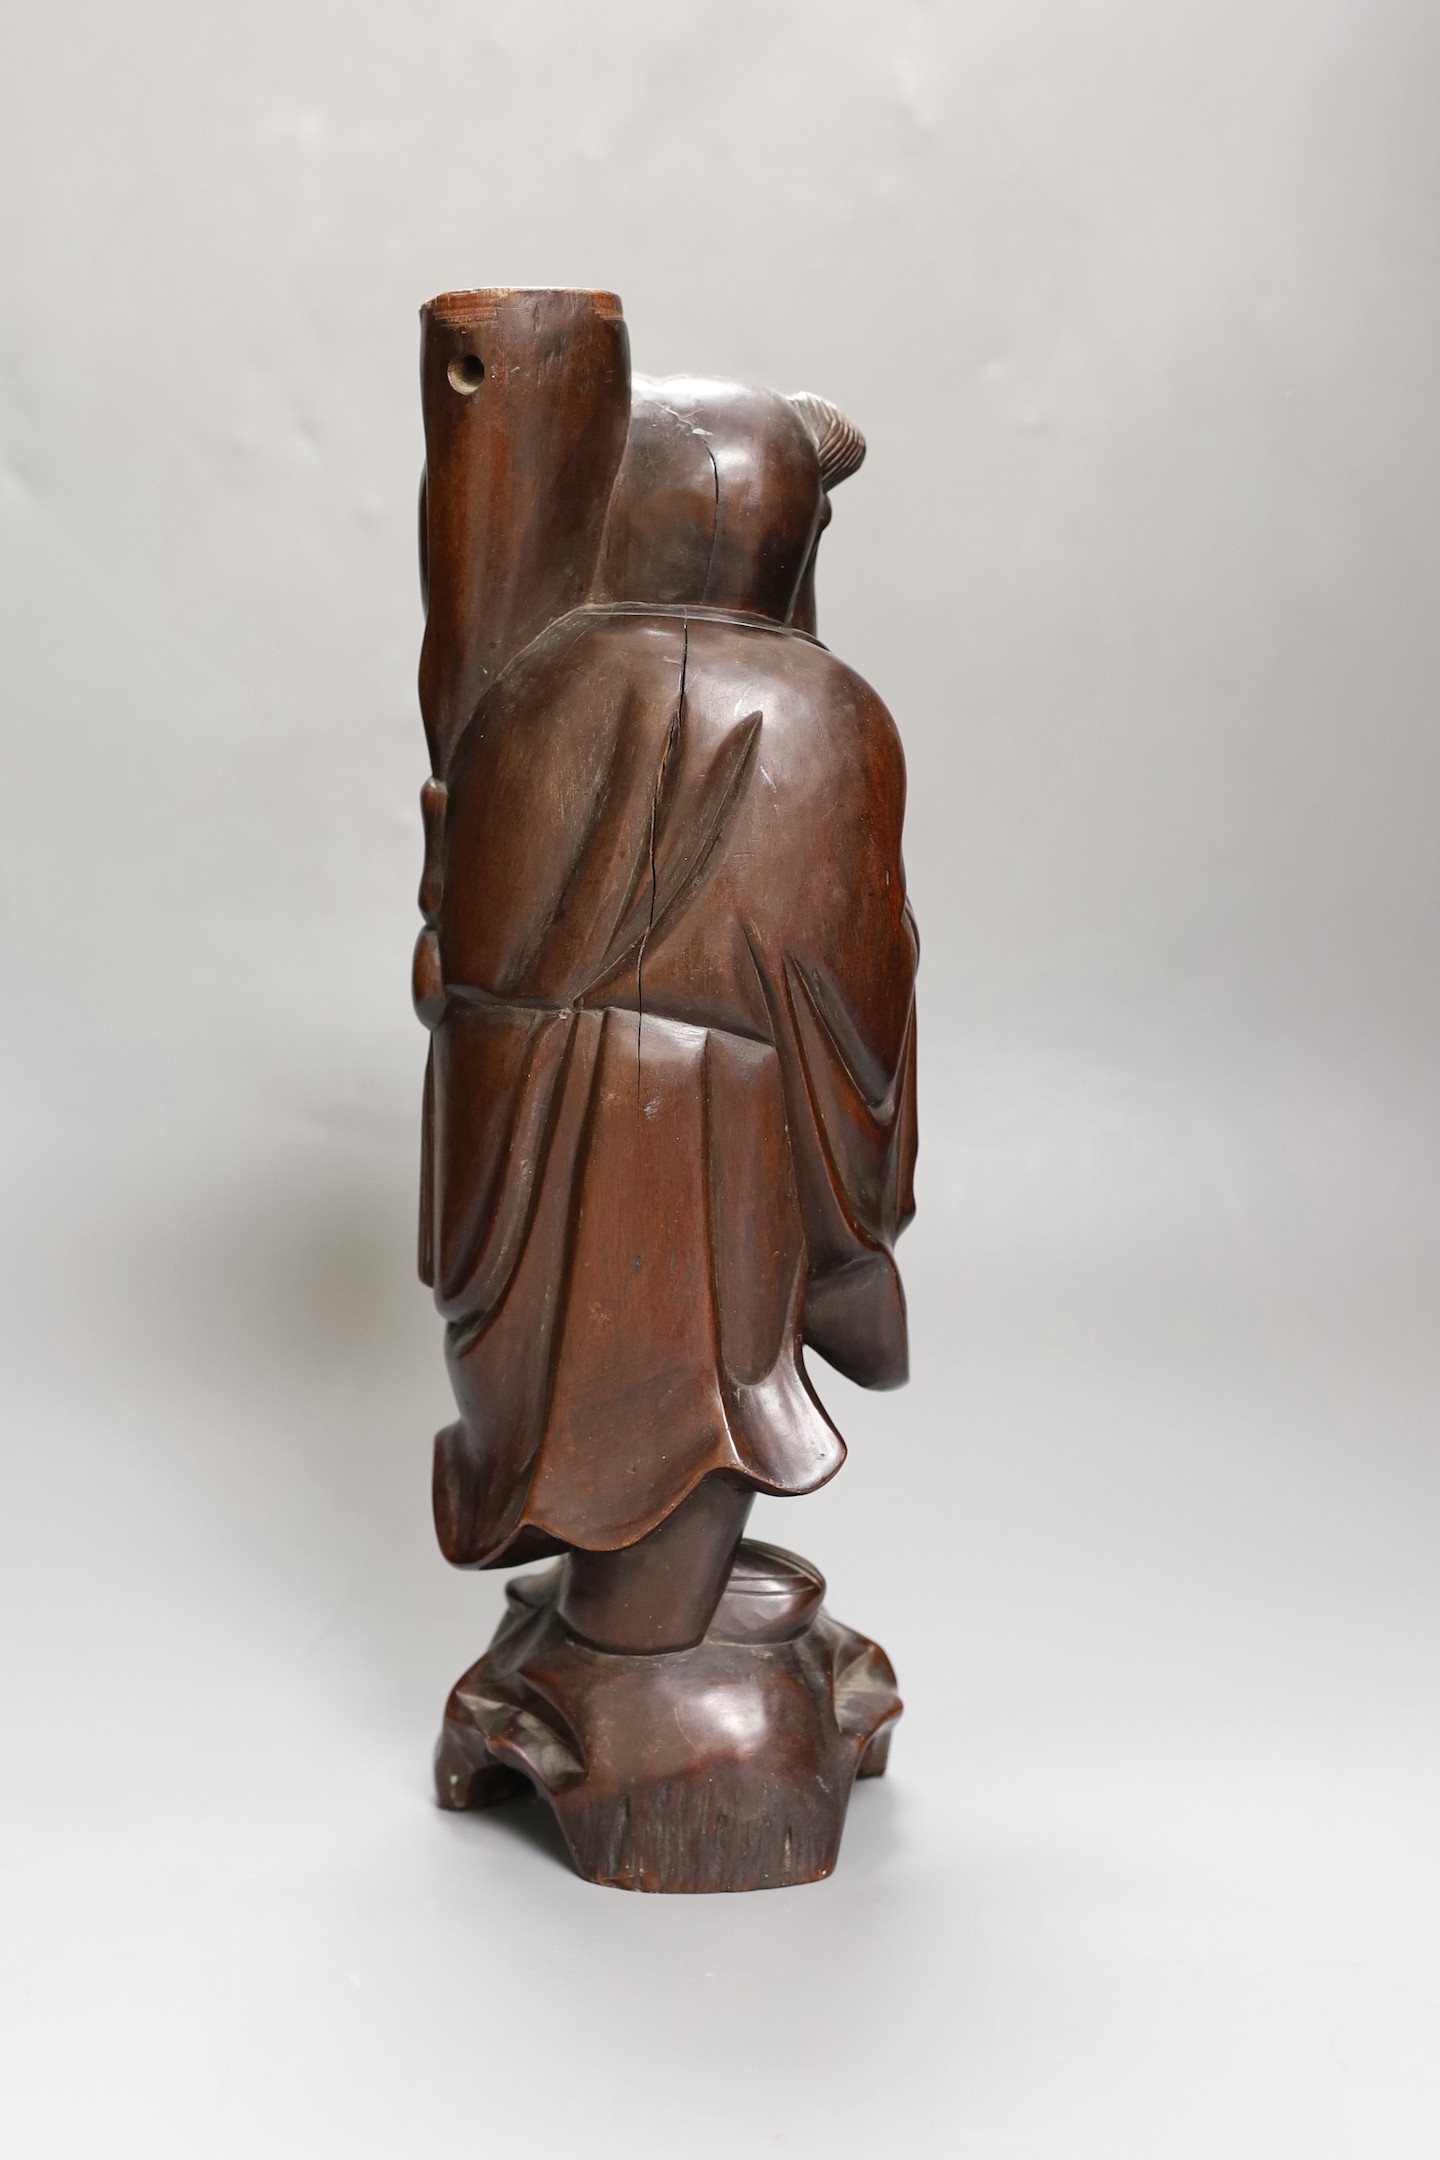 A Chinese hardwood figure of an immortal, 36cm